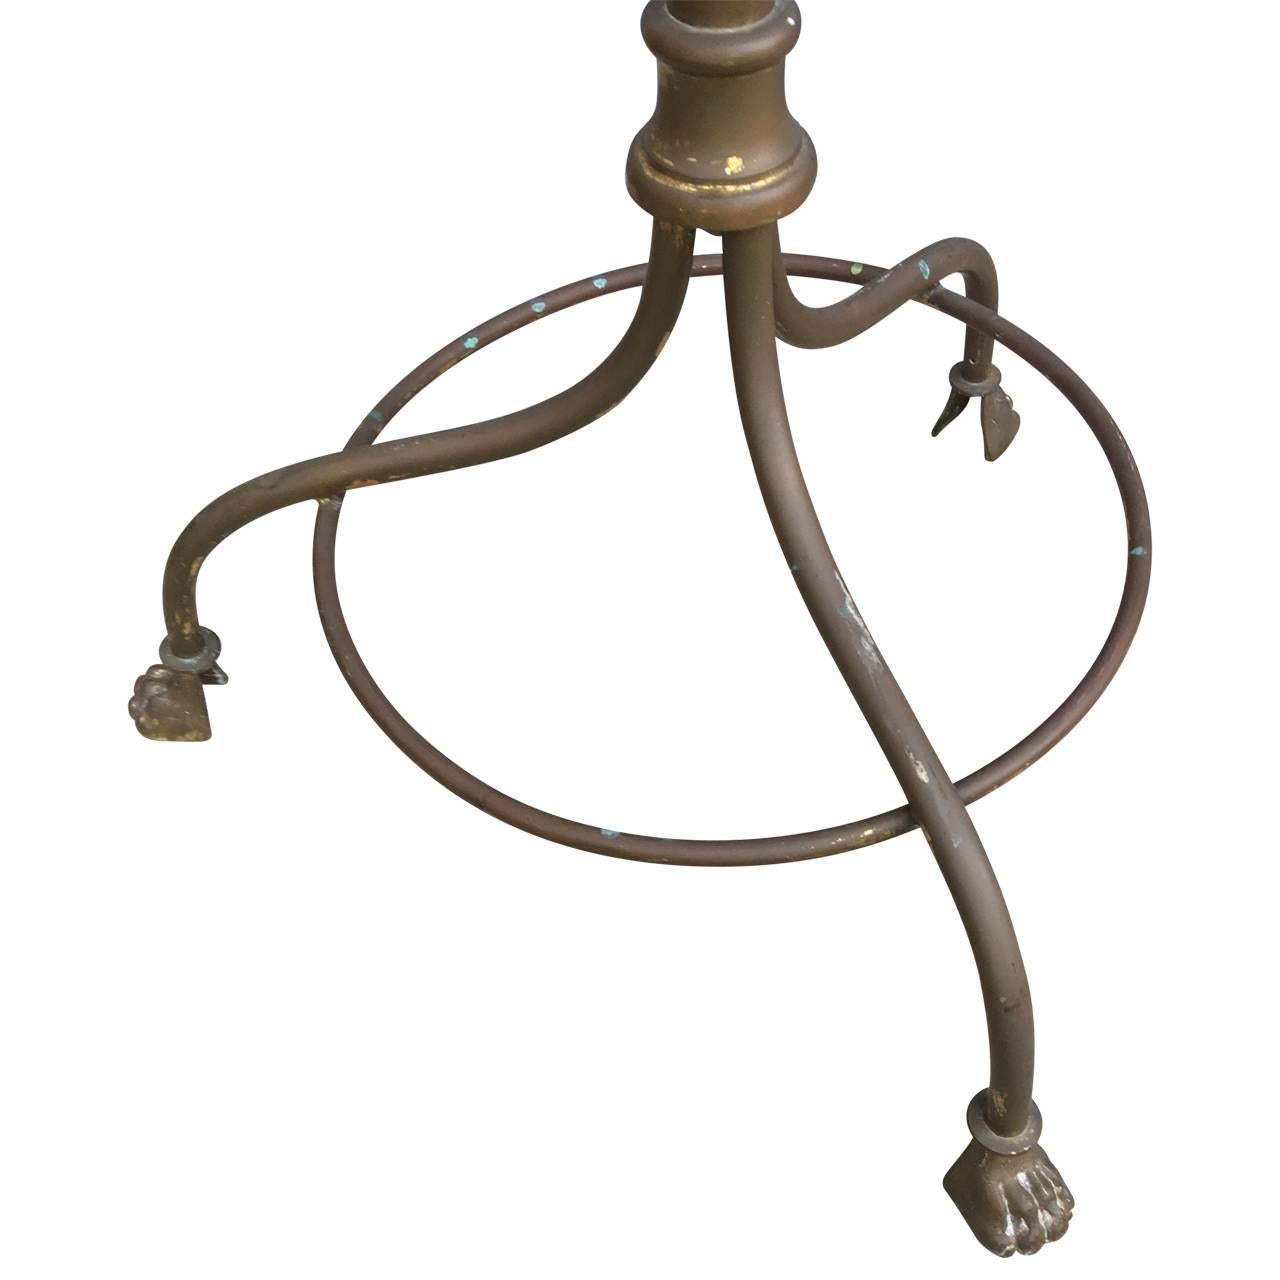 Two 19th century French church candelabra.
Tallest height 45 inches.